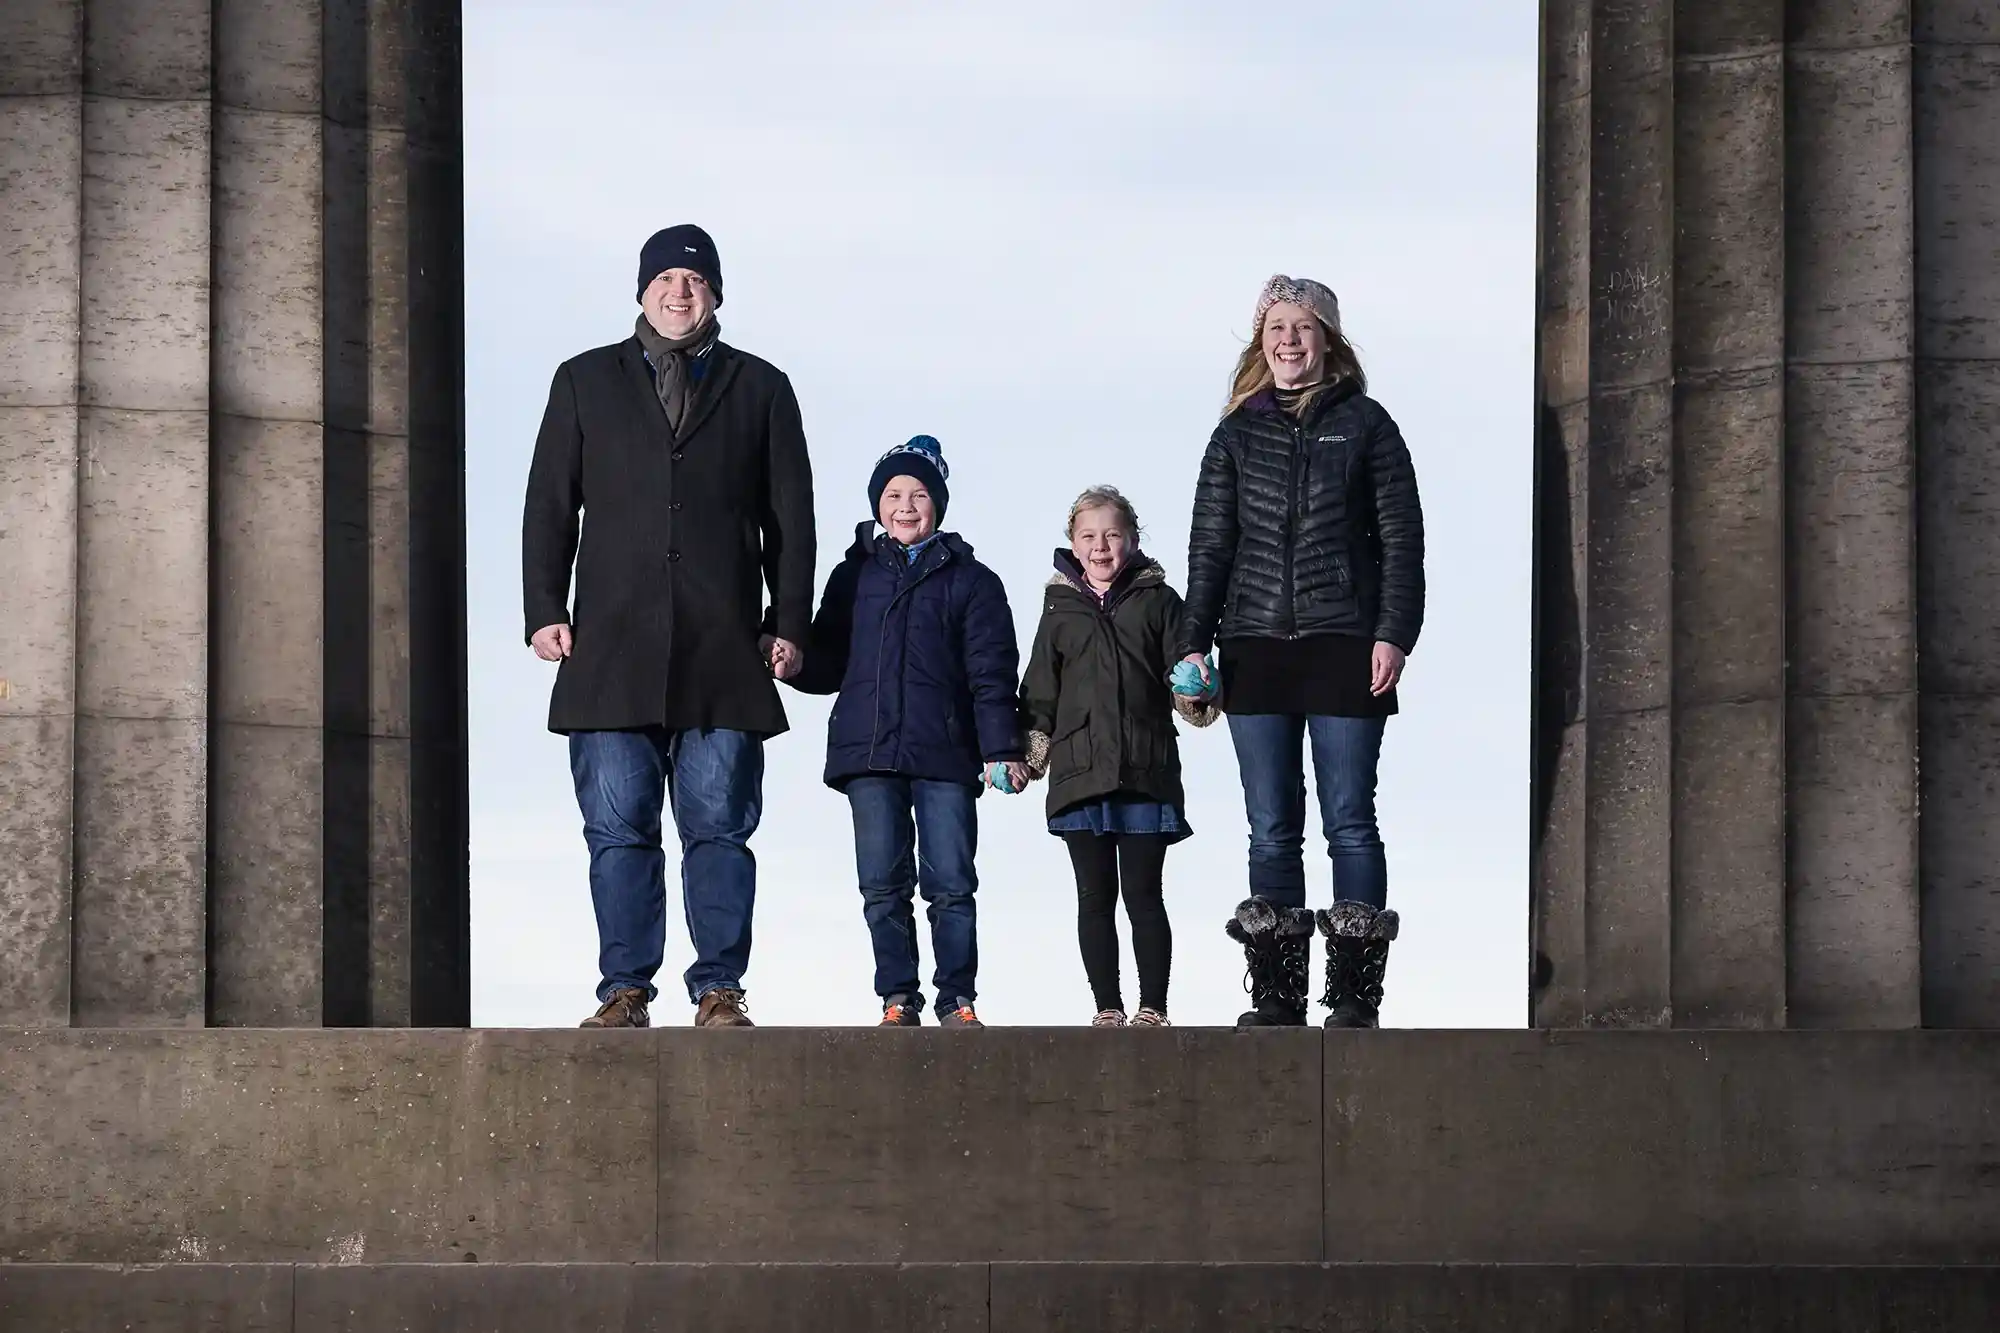 A family of four, dressed in winter clothes, stand between large stone pillars. The parents stand on the sides, holding hands with their two children in the middle.